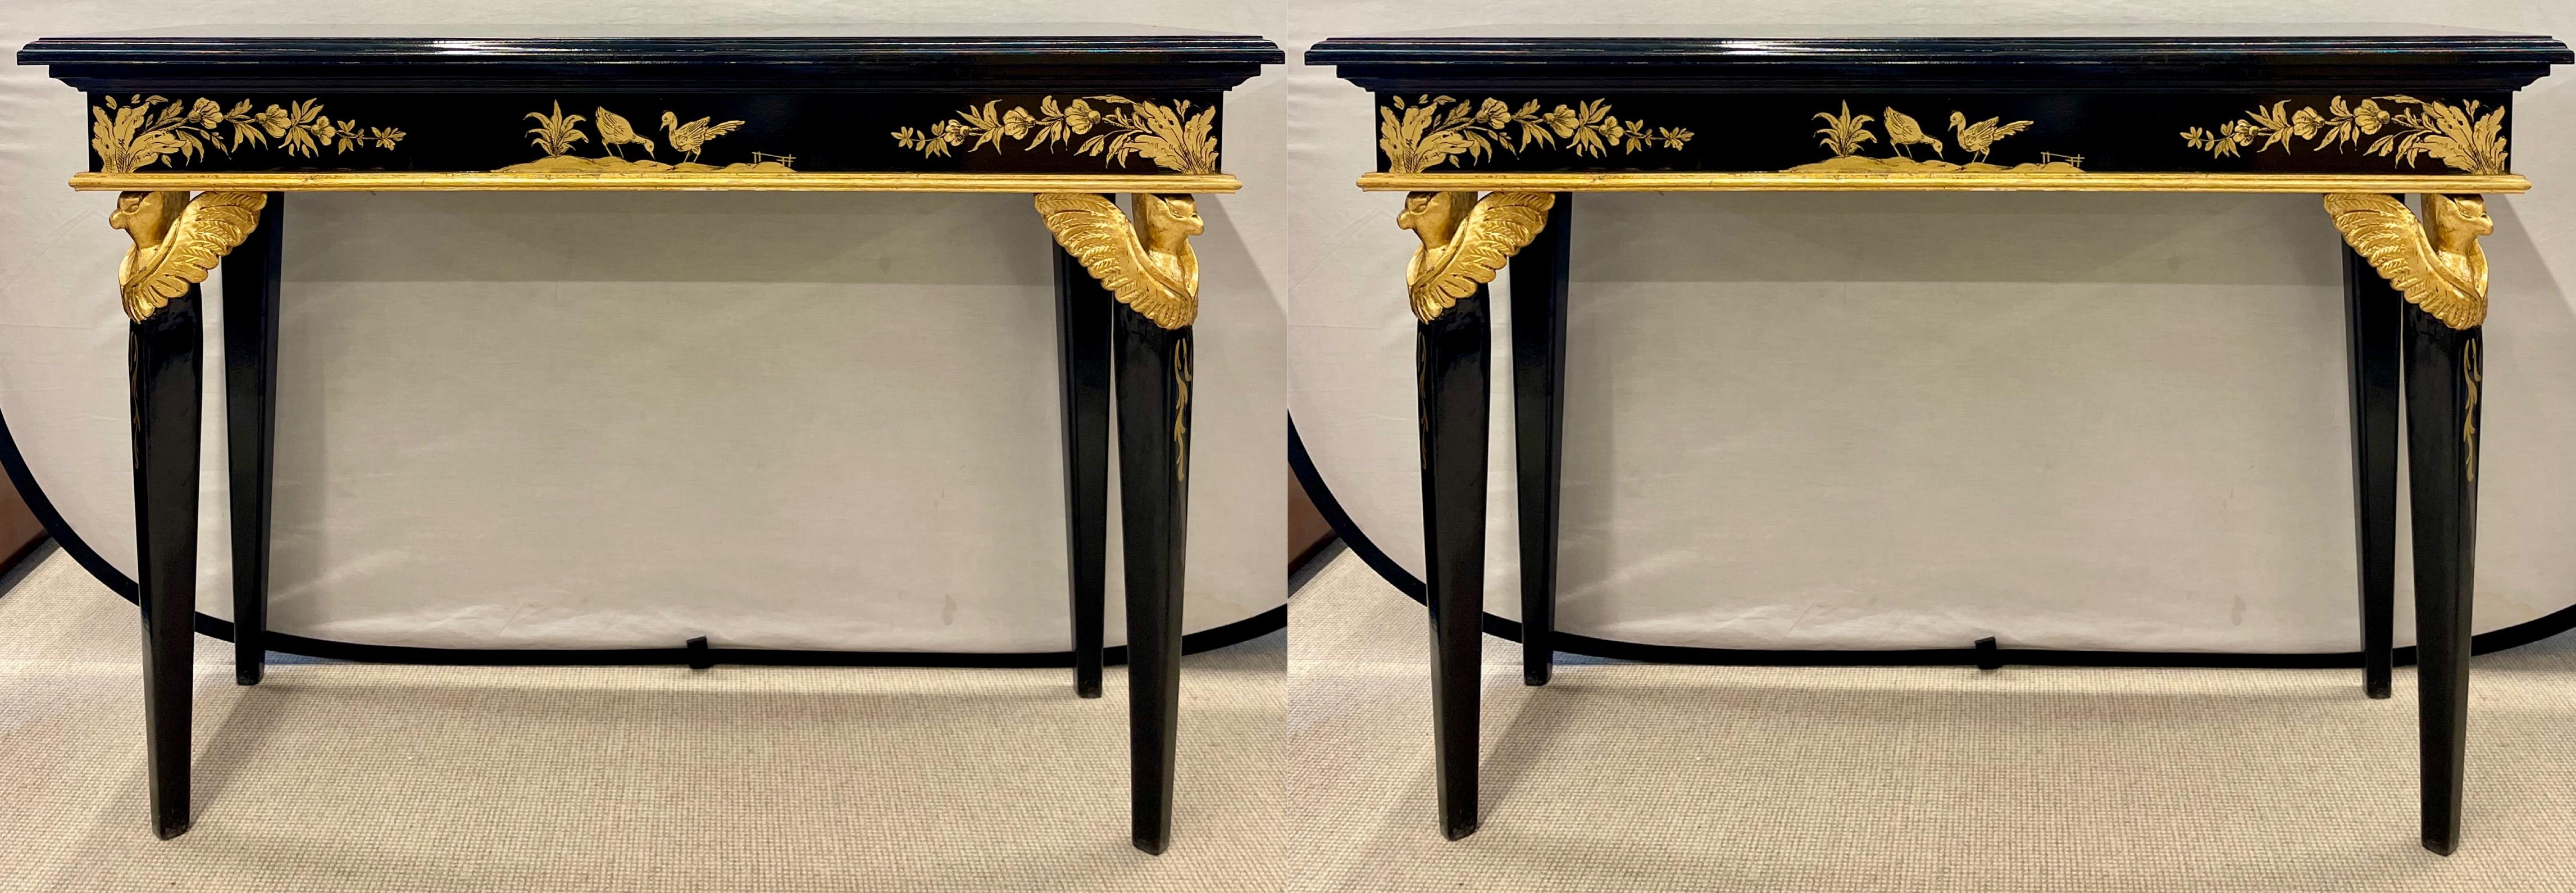 20th Century Pair of Hollywood Regency Style Console Sofa Tables Ebony and Gilt Decorated